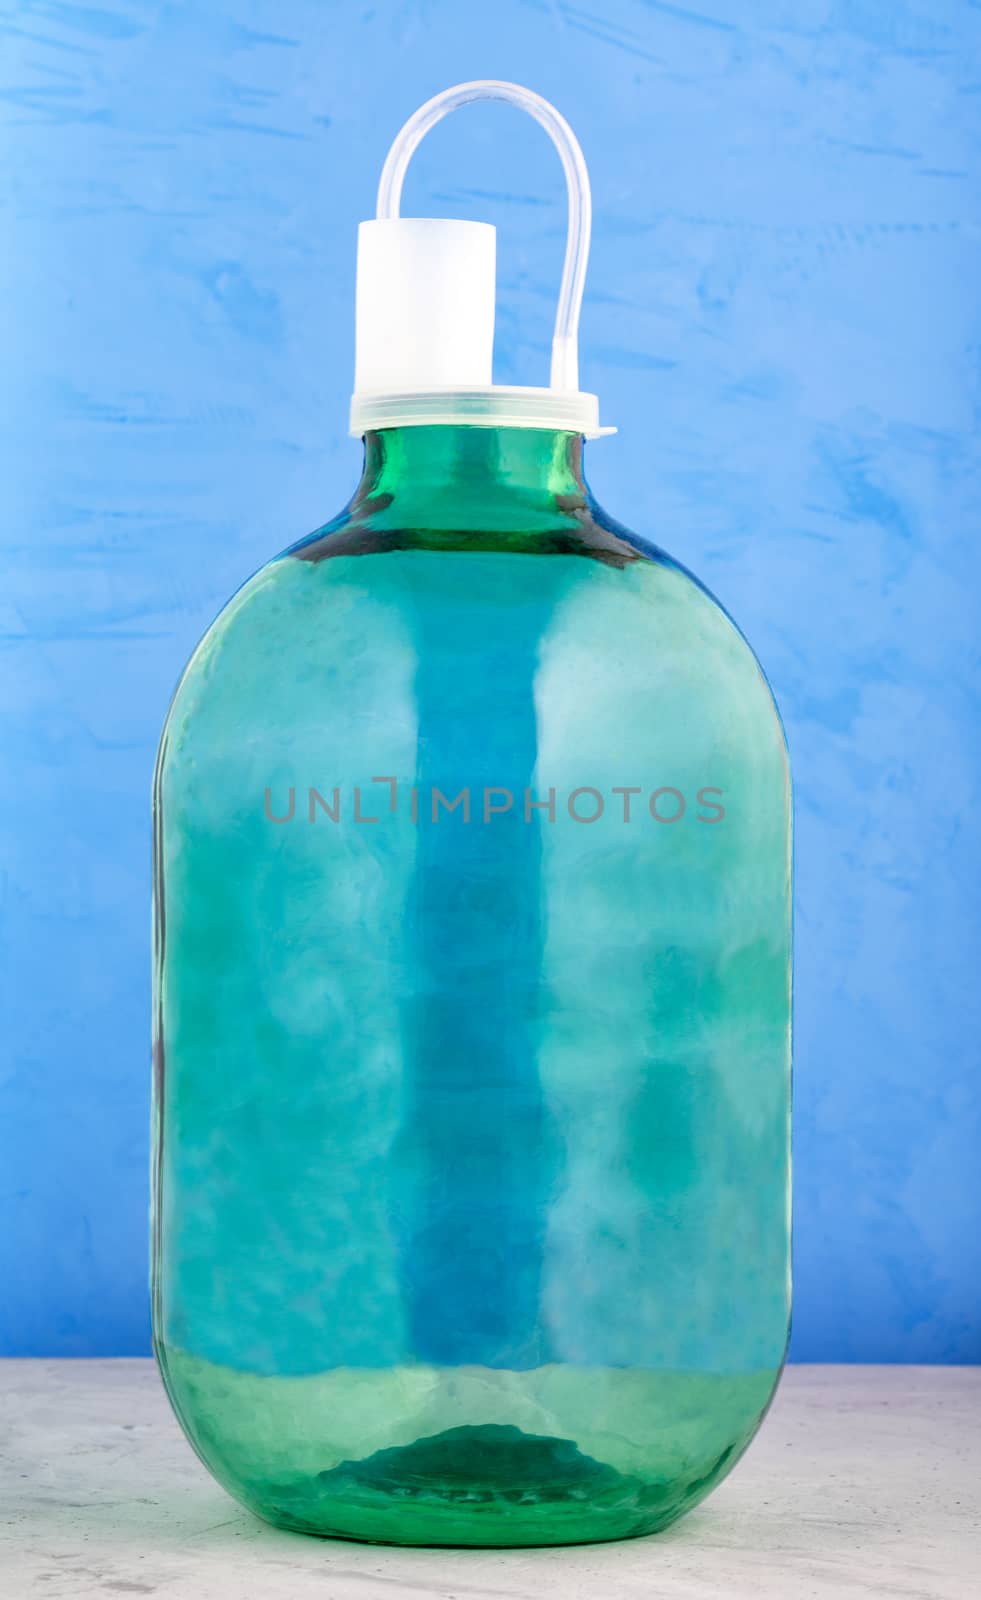 A 10 liter glass jar is made of thick green glass with a nylon cover with a water lock on a blue background. by Sergii